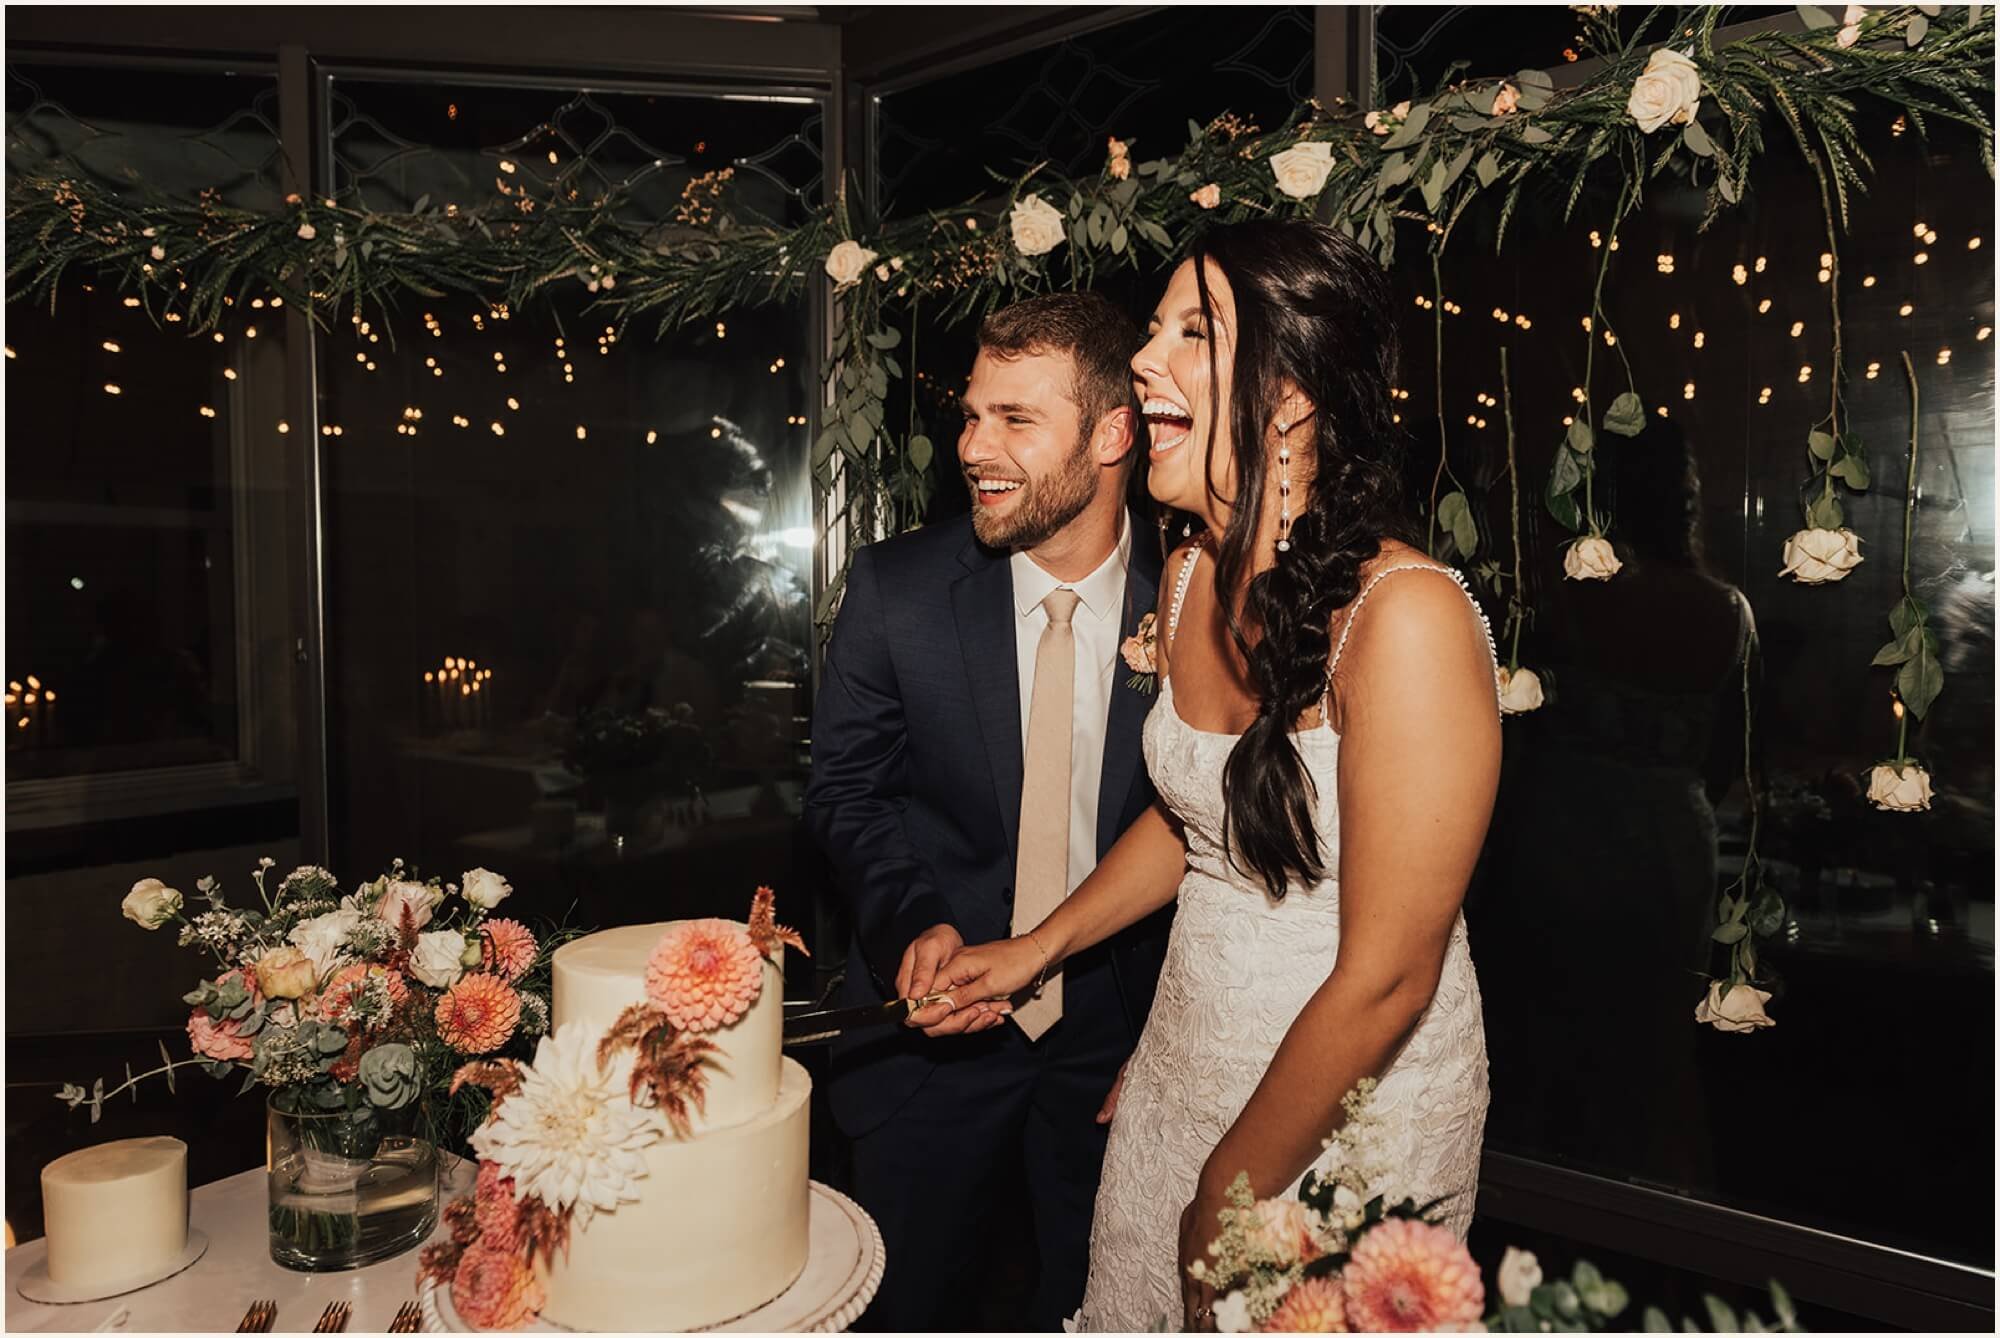 Bride and groom laughing during cake cutting